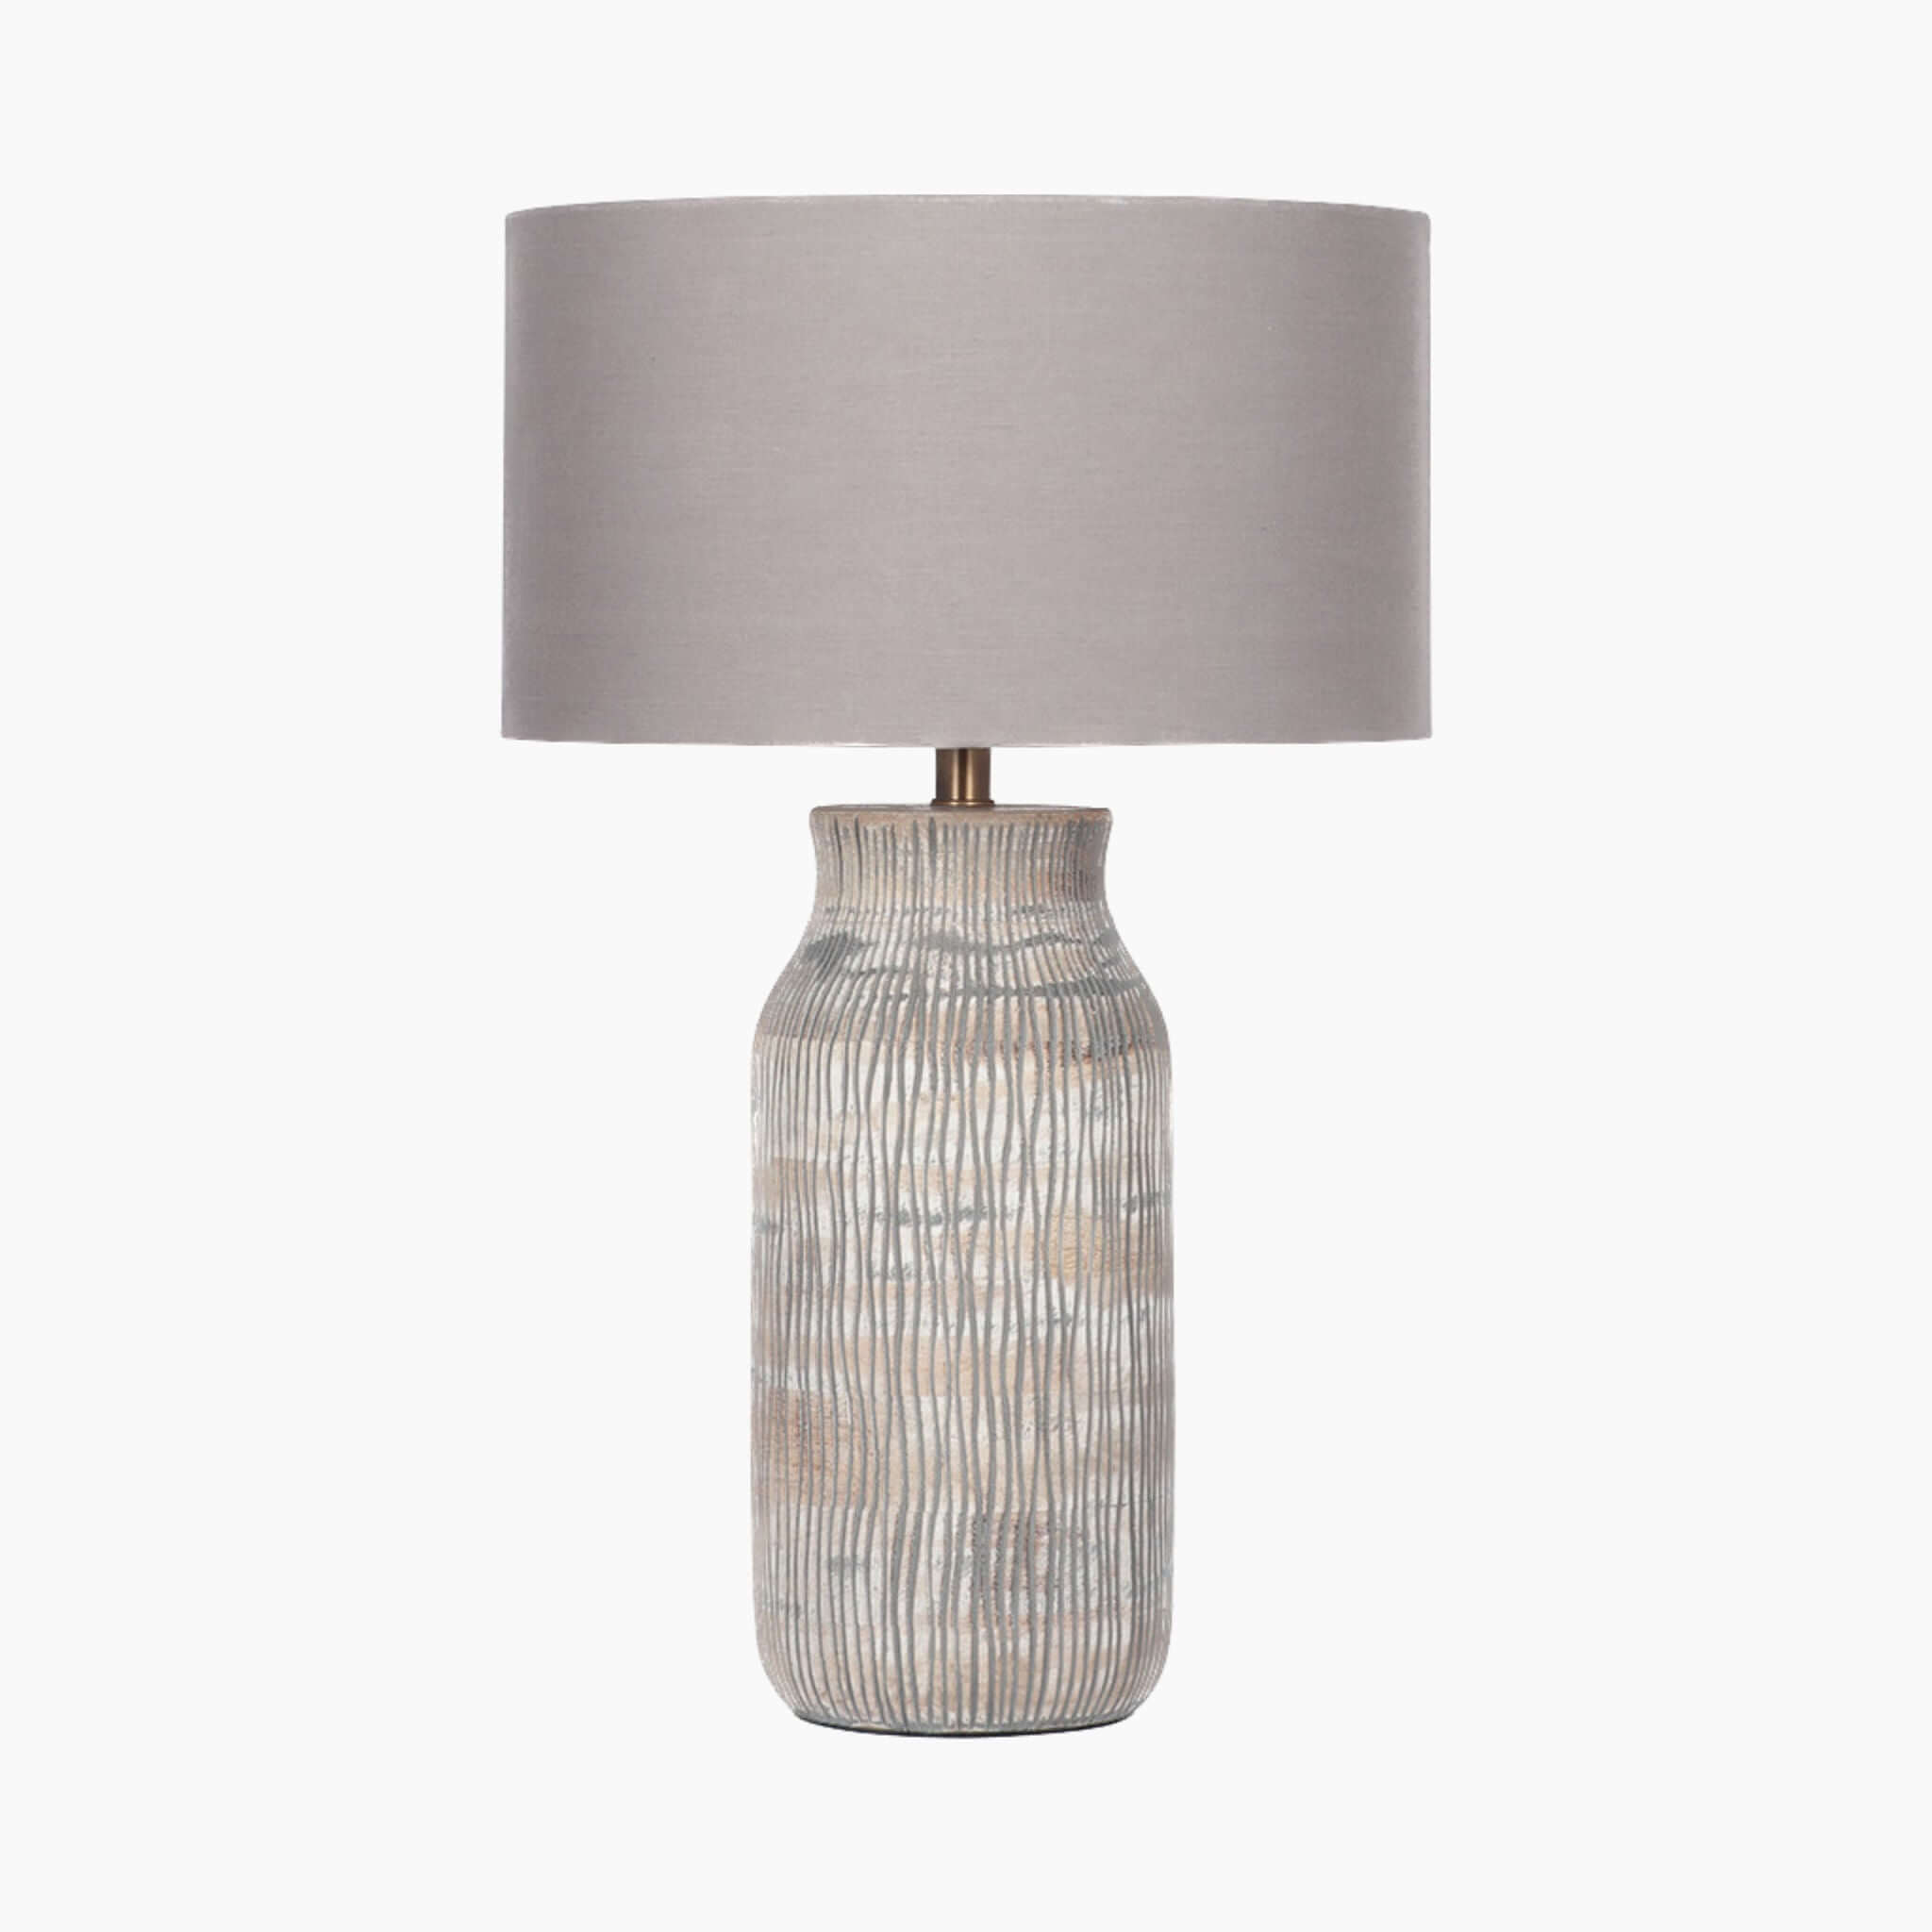 Soar Table lamp with Shade